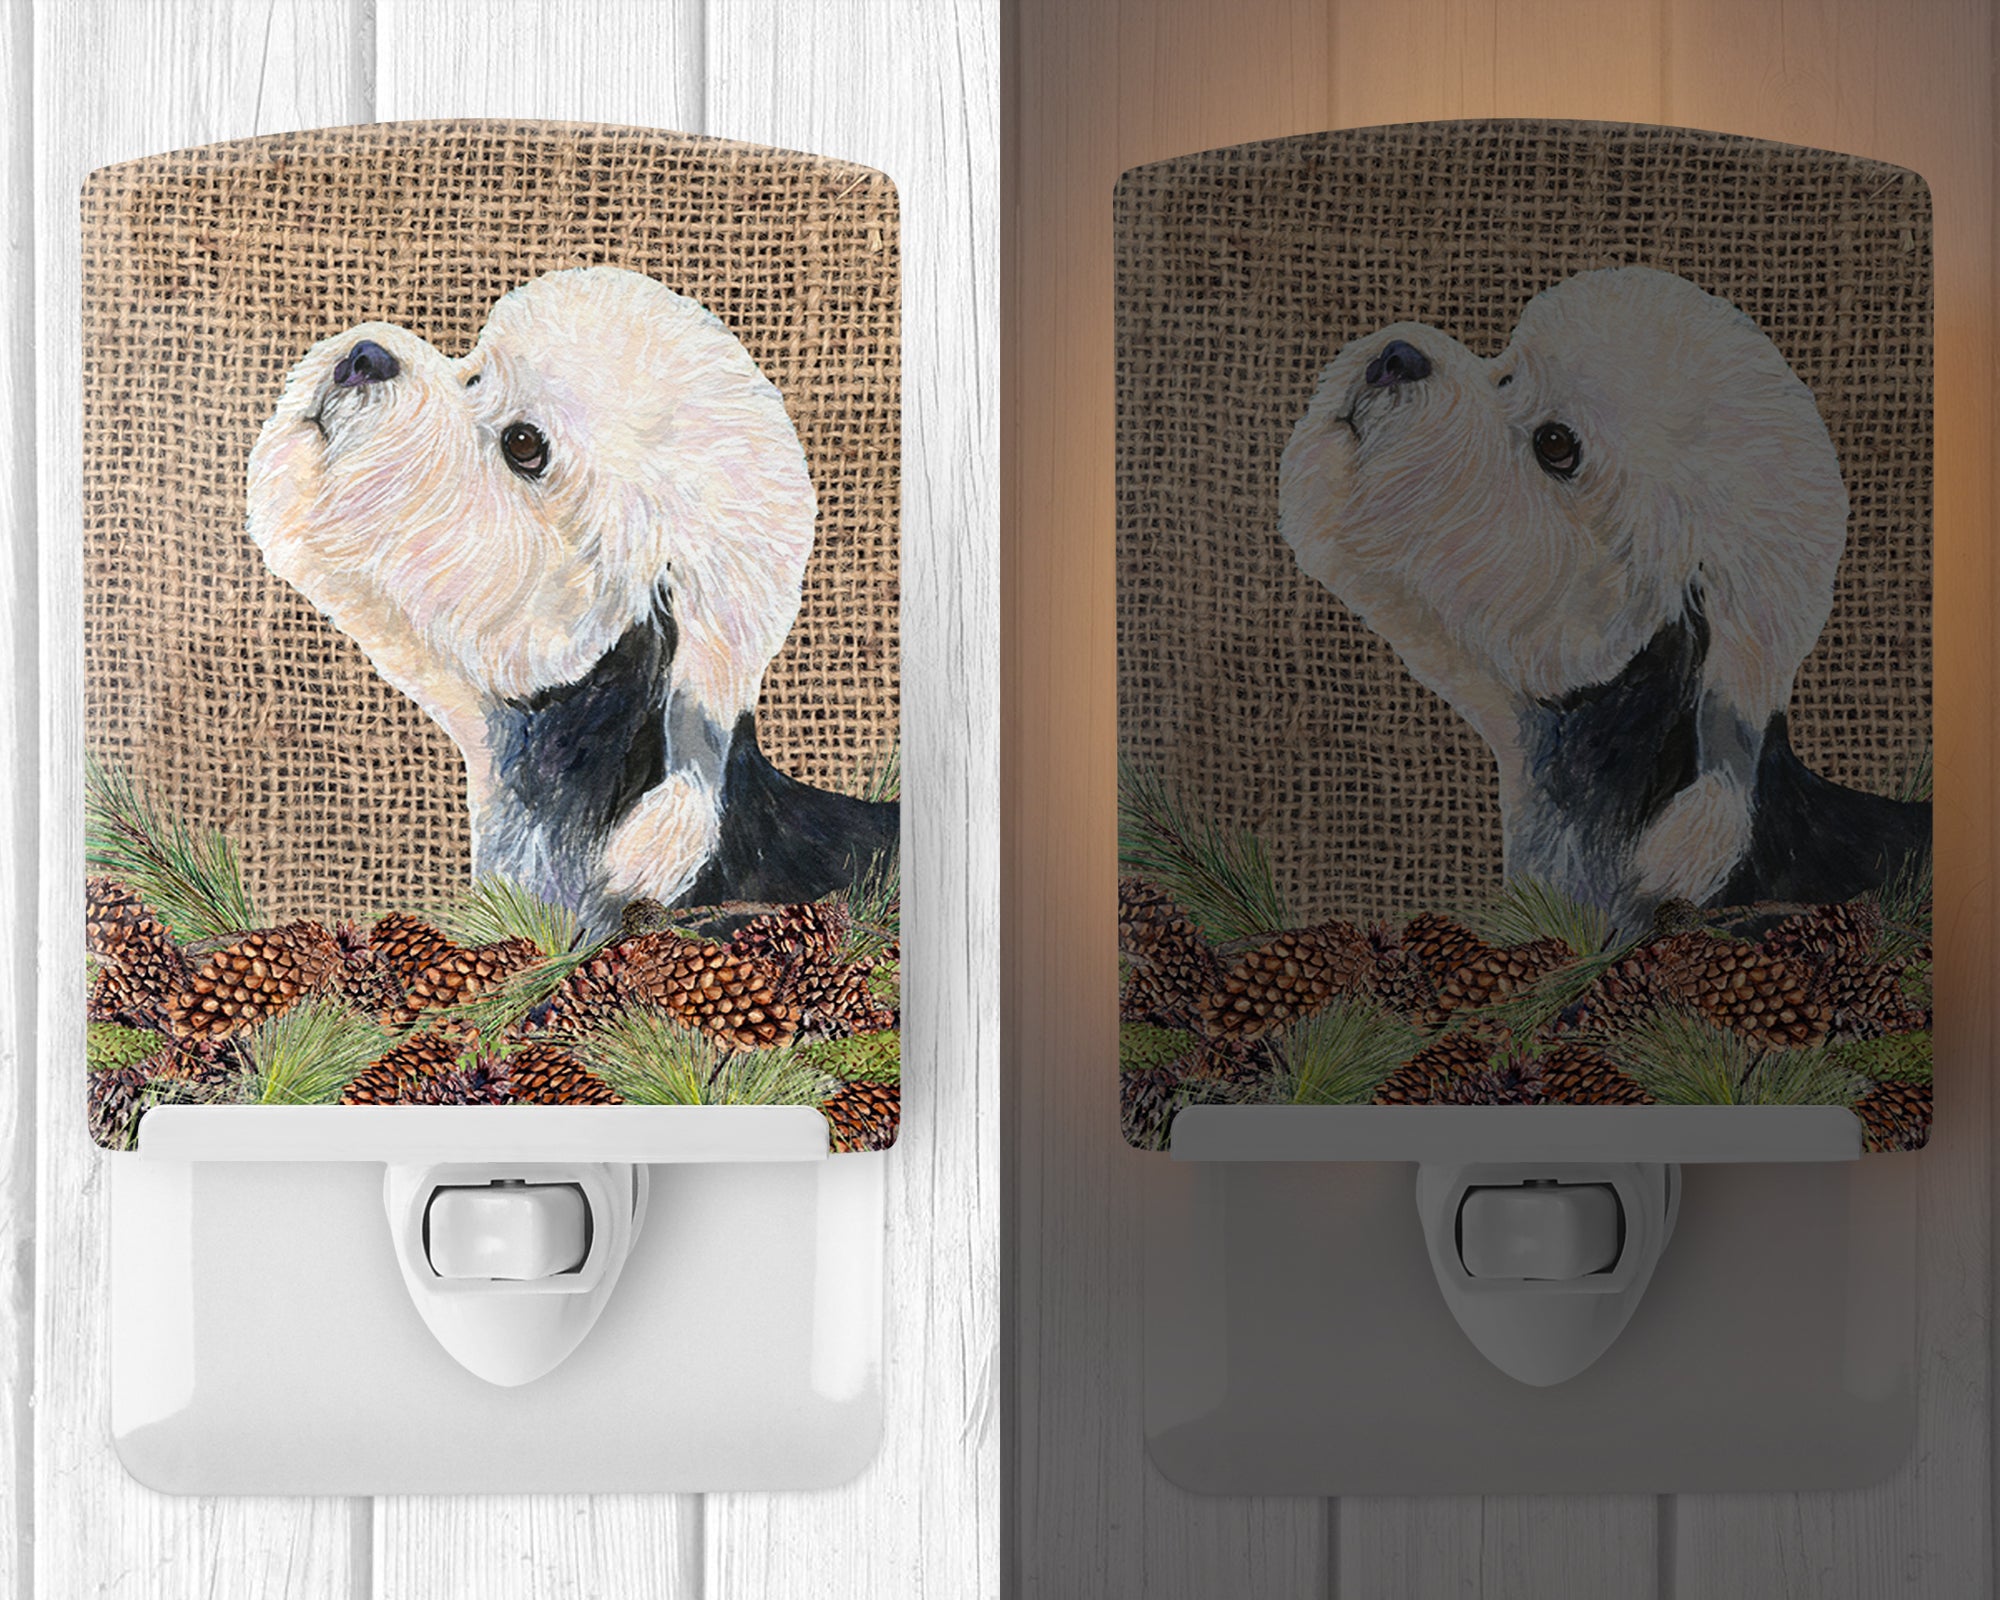 Dandie Dinmont Terrier on Faux Burlap with Pine Cones Ceramic Night Light SS4092CNL - the-store.com